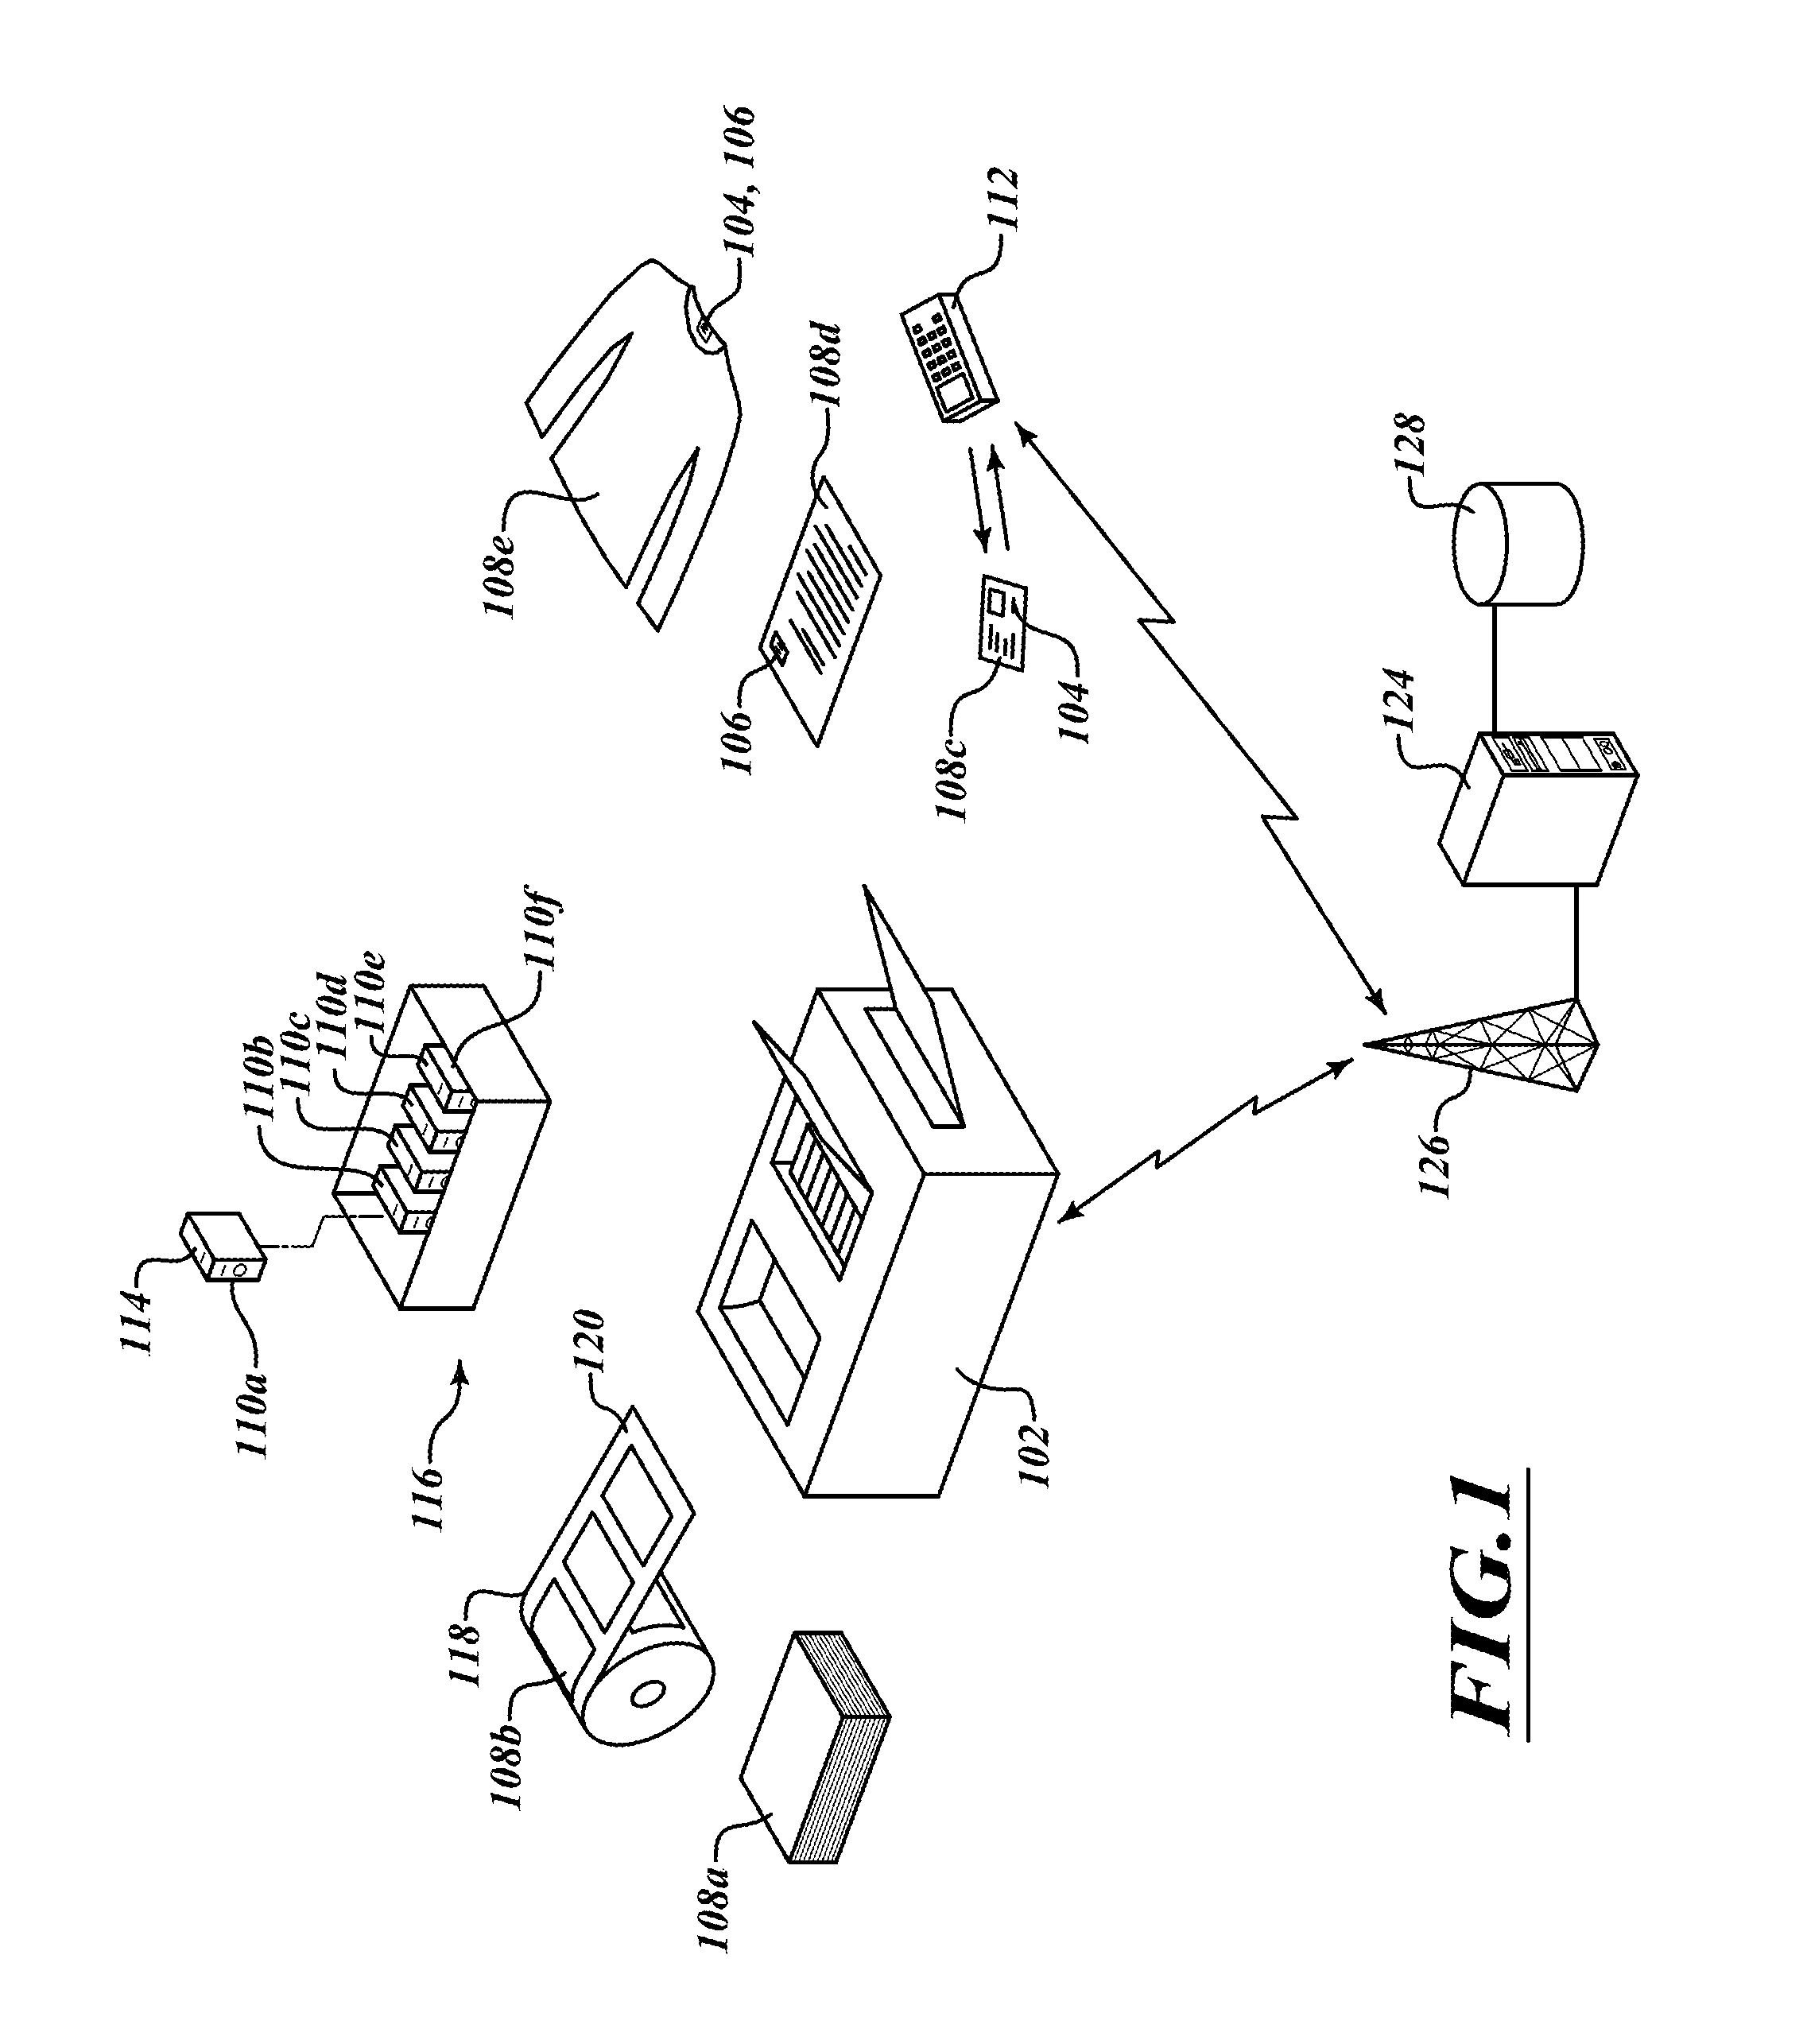 Systems, methods and articles related to machine-readable indicia and symbols